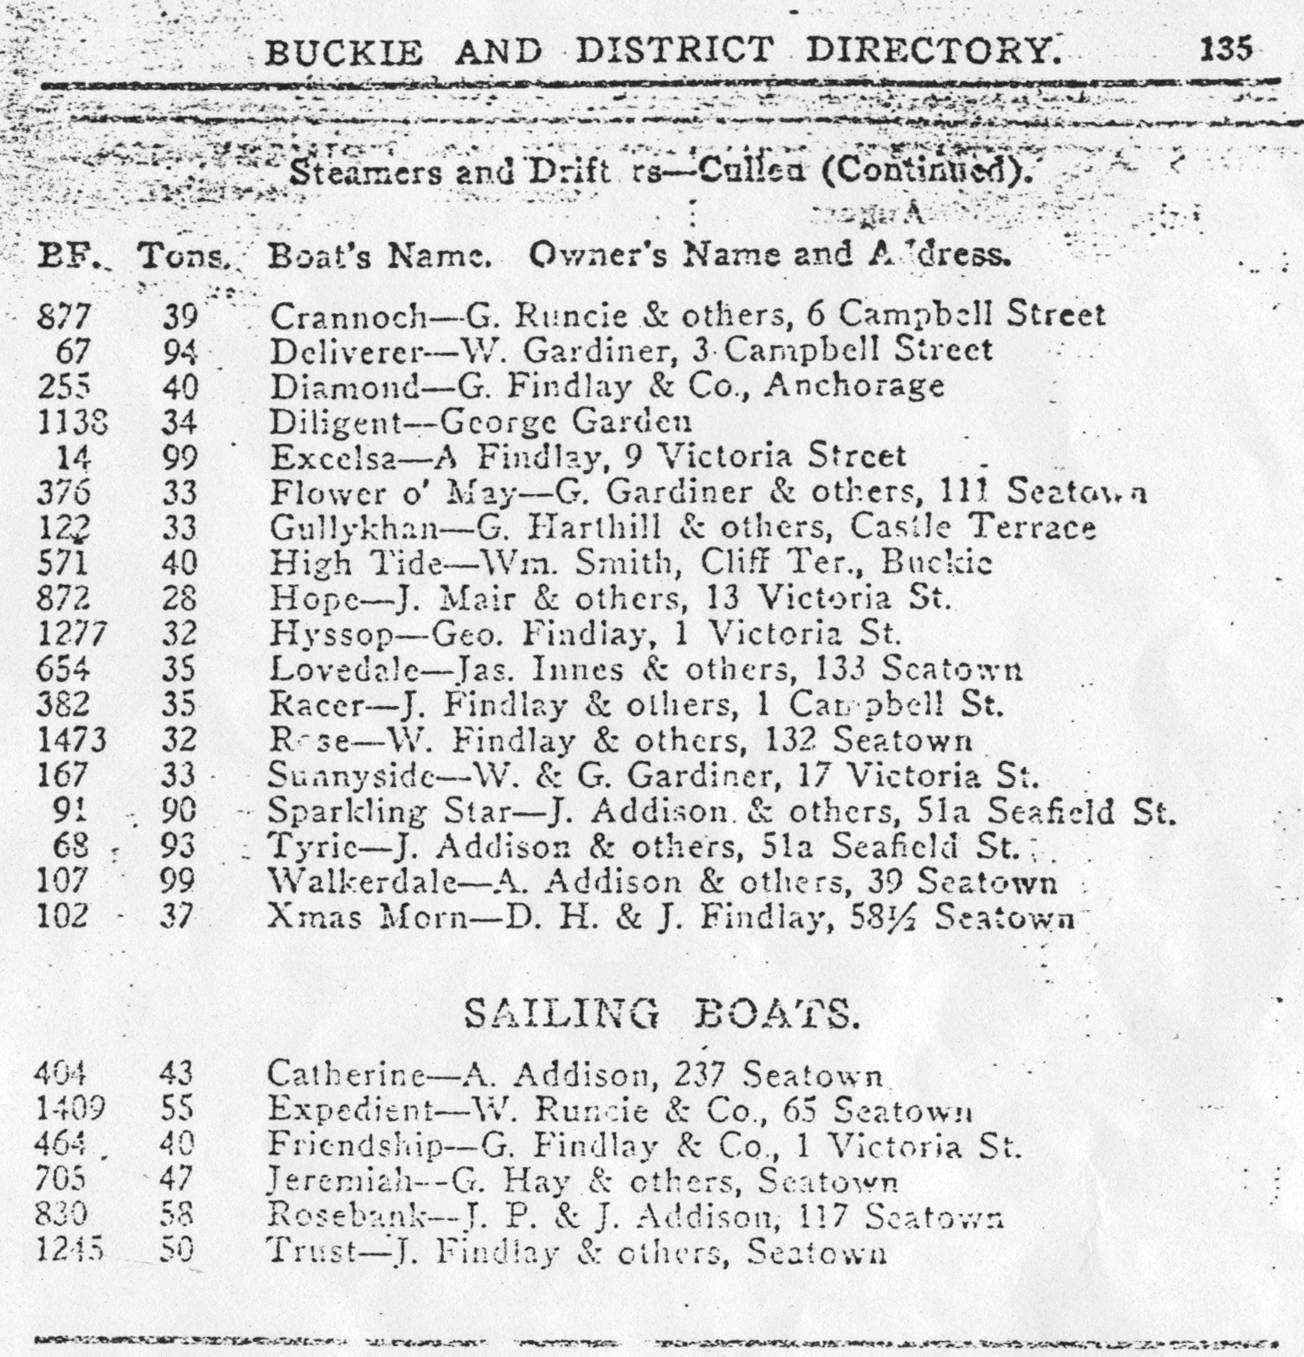 Buckie and District Directory 1926, page 135, Steamers and Drifters